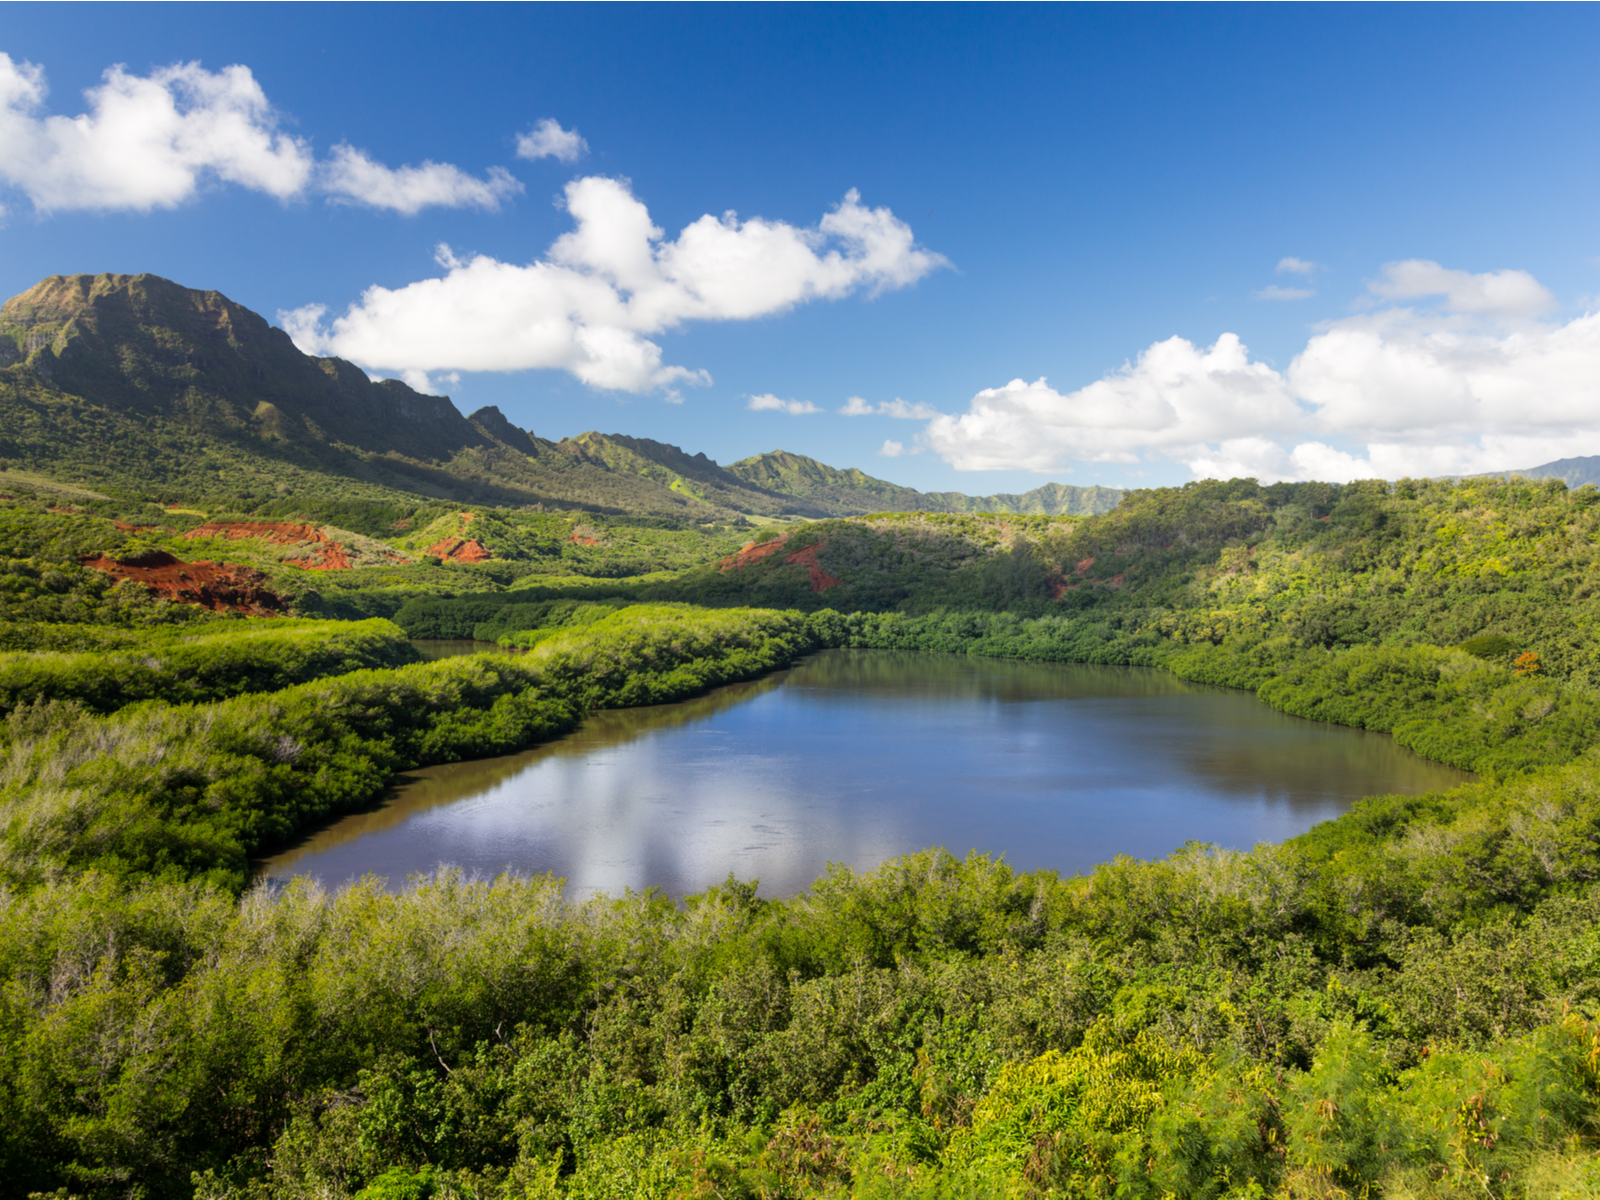 Translucent water at the traditional Alekoko Pond is surrounded by flourishing greeneries, viewing this scenery is one of the best things to do in Kauai